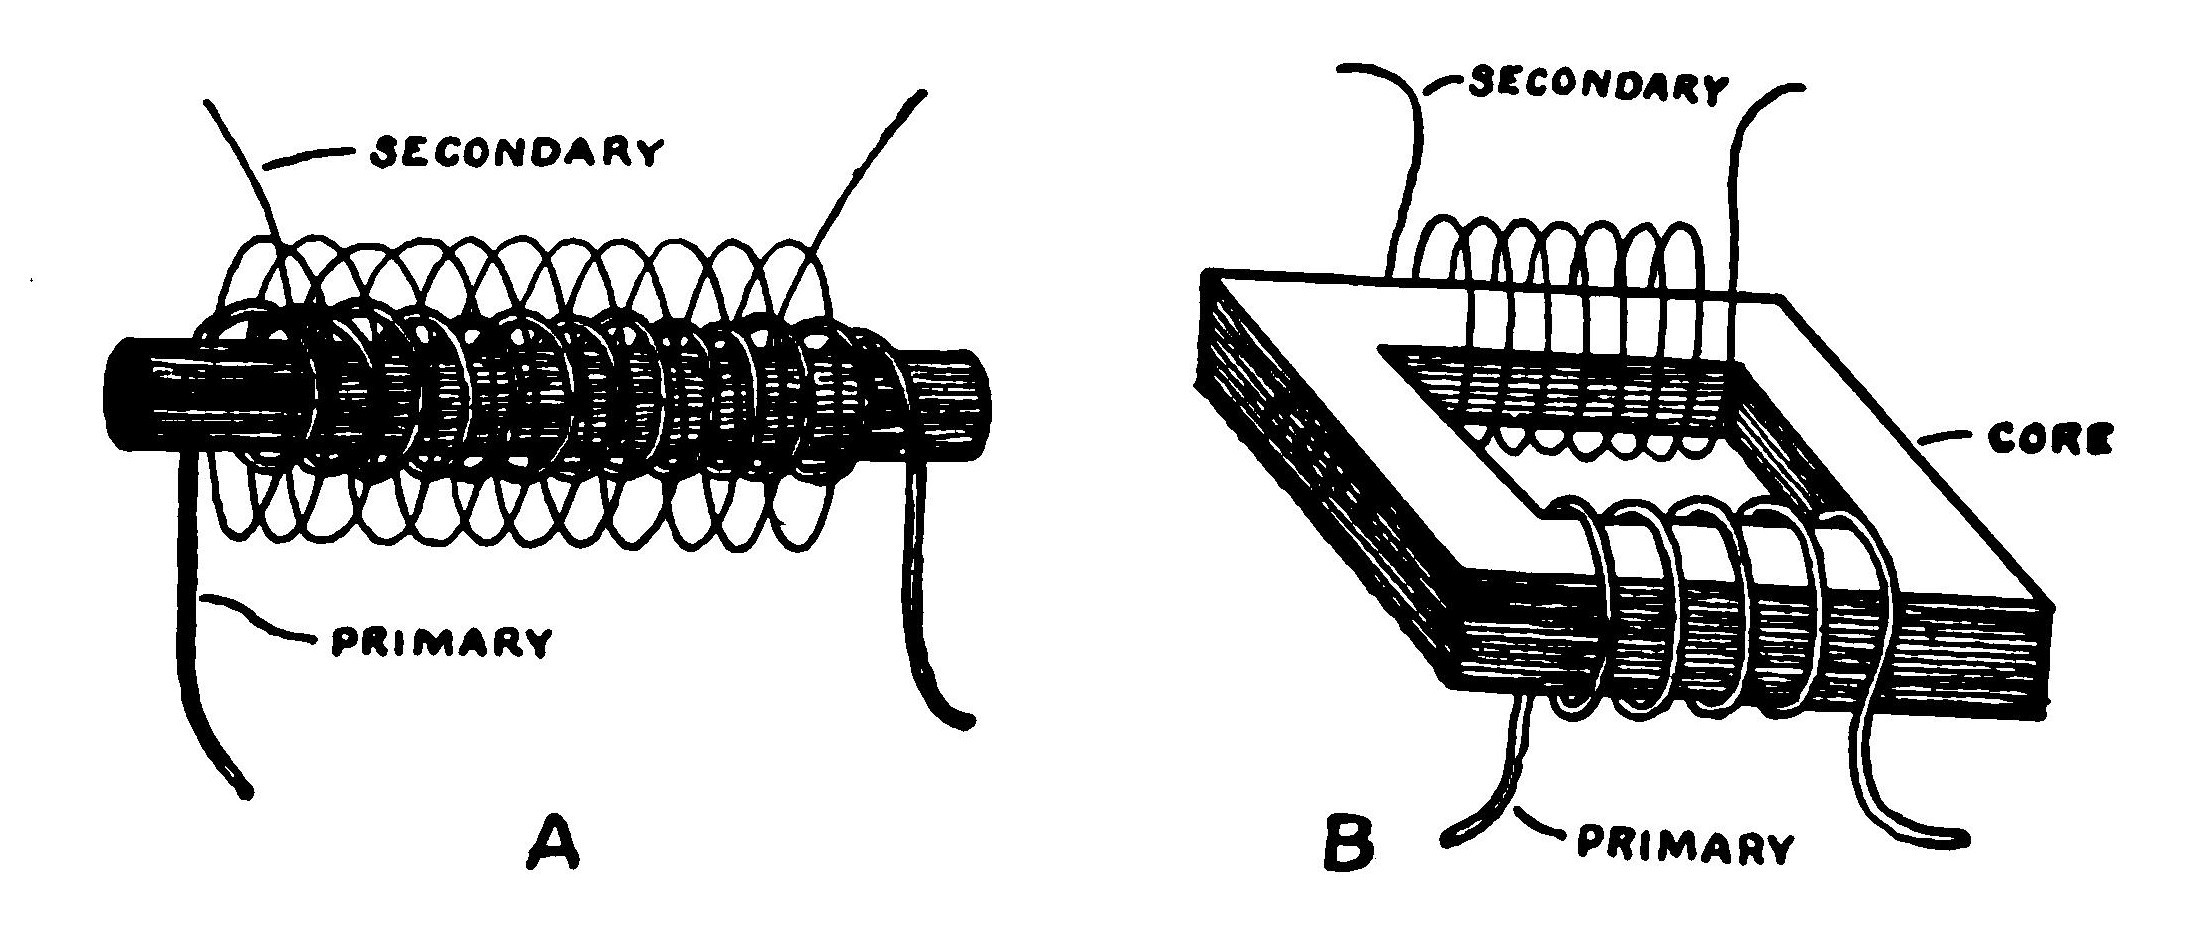 FIG. 39.—Open and closed core transformers.